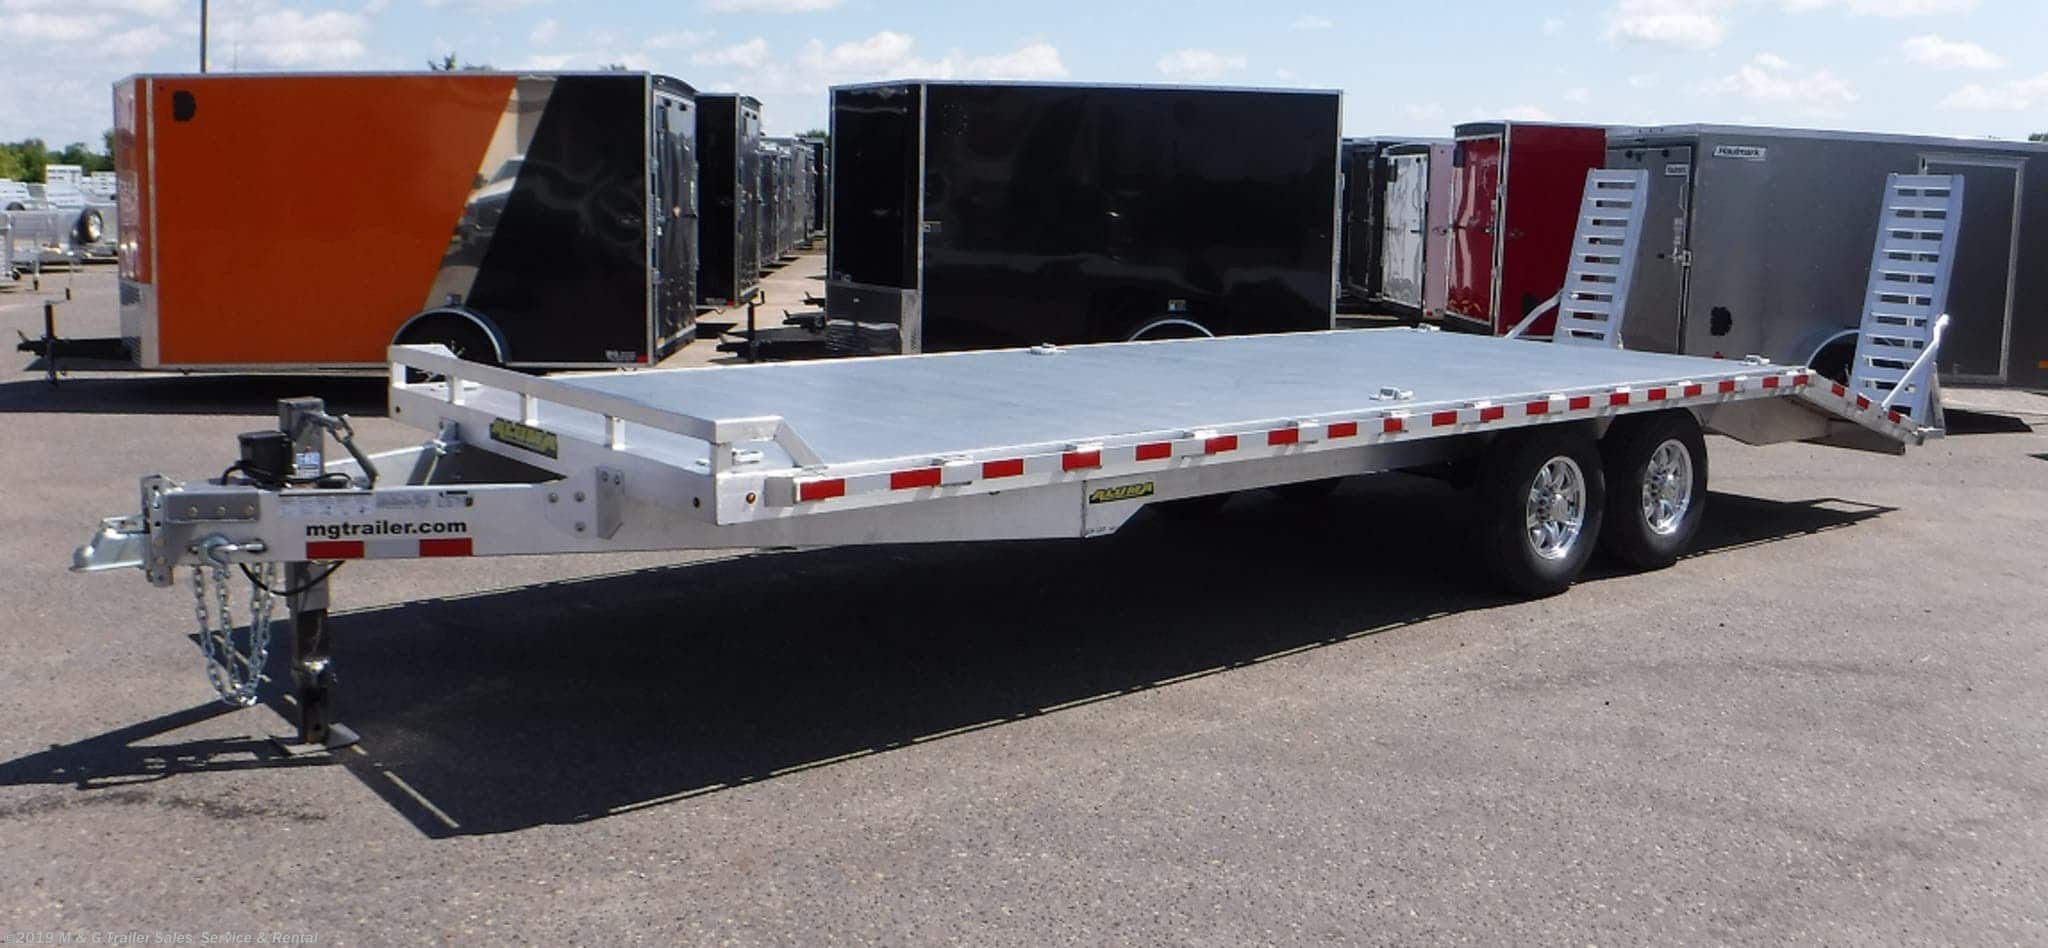 What Are the Benefits of Buying an Aluminum Trailer?